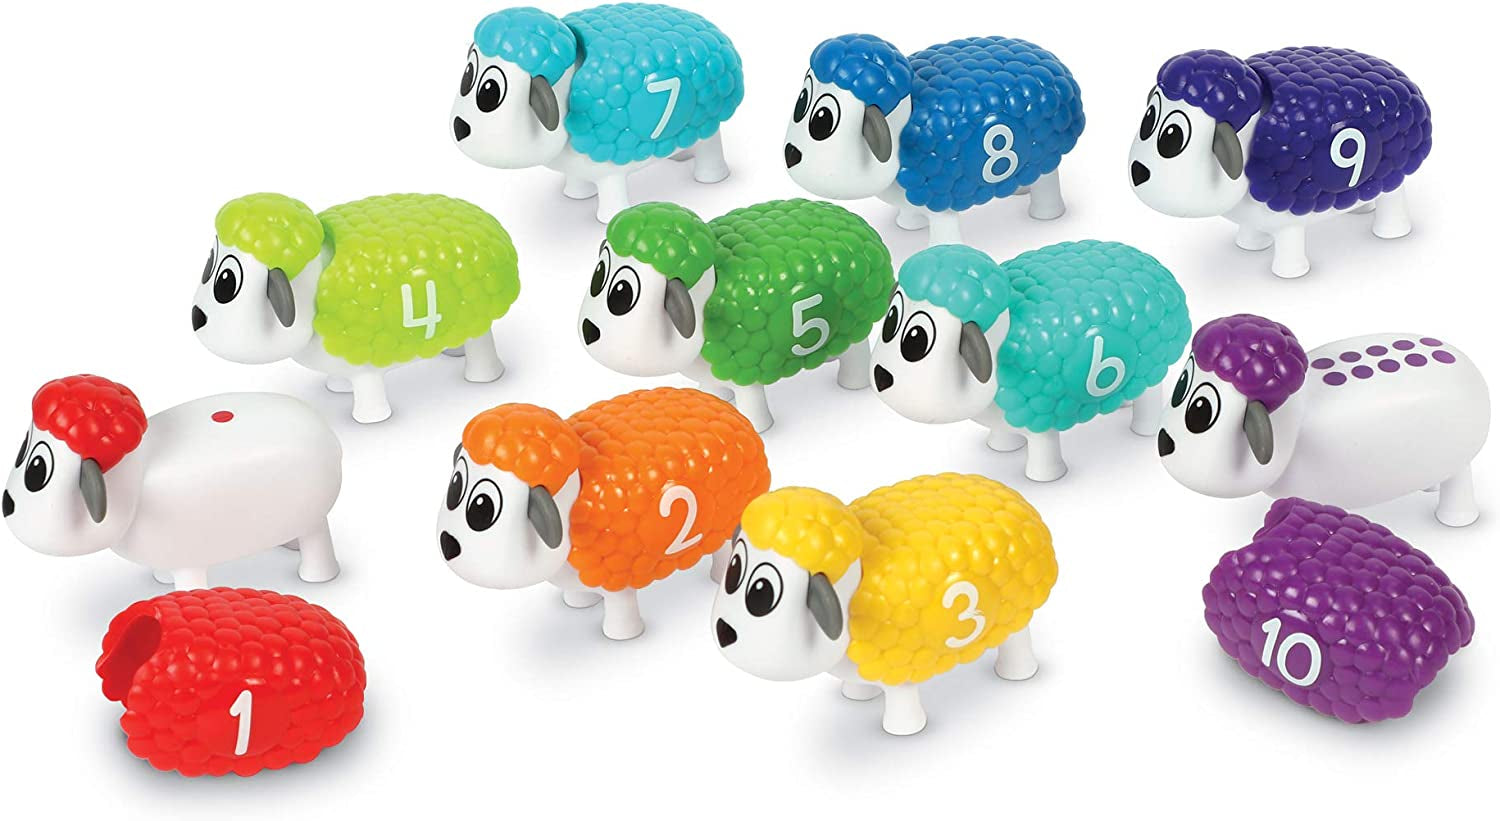 Snap-N-Learn Counting Sheep - 20 Pieces, Ages 18+ Months Toddler Learning Toys, Counting and Sorting Toys, Farm Animals Toys for Kids